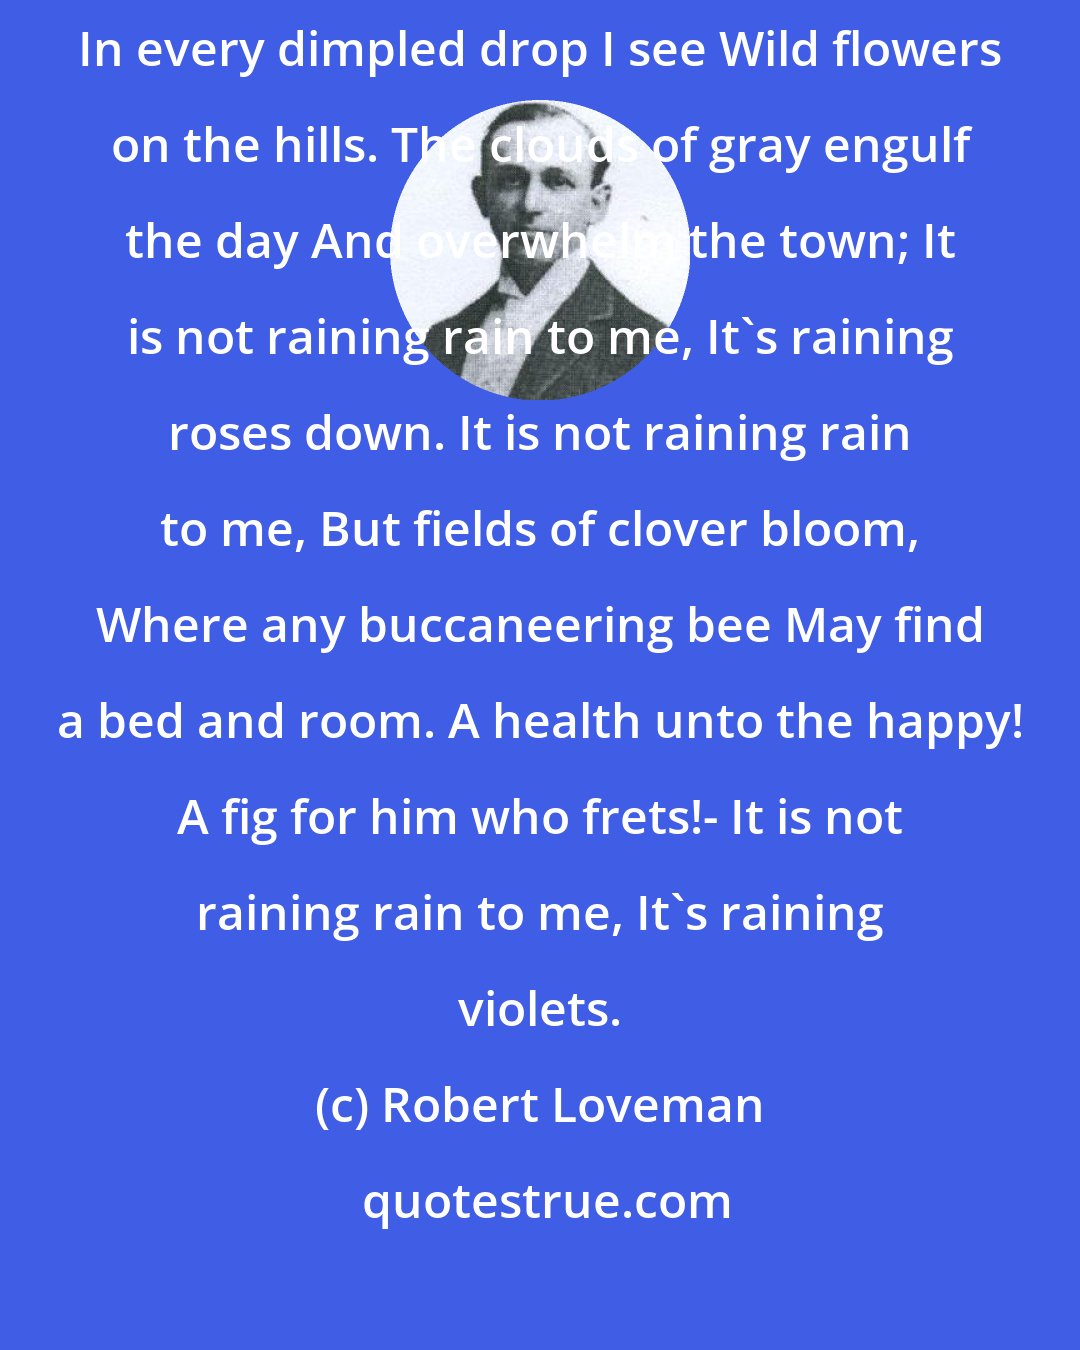 Robert Loveman: April Rain It is not raining rain to me, It's raining daffodils; In every dimpled drop I see Wild flowers on the hills. The clouds of gray engulf the day And overwhelm the town; It is not raining rain to me, It's raining roses down. It is not raining rain to me, But fields of clover bloom, Where any buccaneering bee May find a bed and room. A health unto the happy! A fig for him who frets!- It is not raining rain to me, It's raining violets.